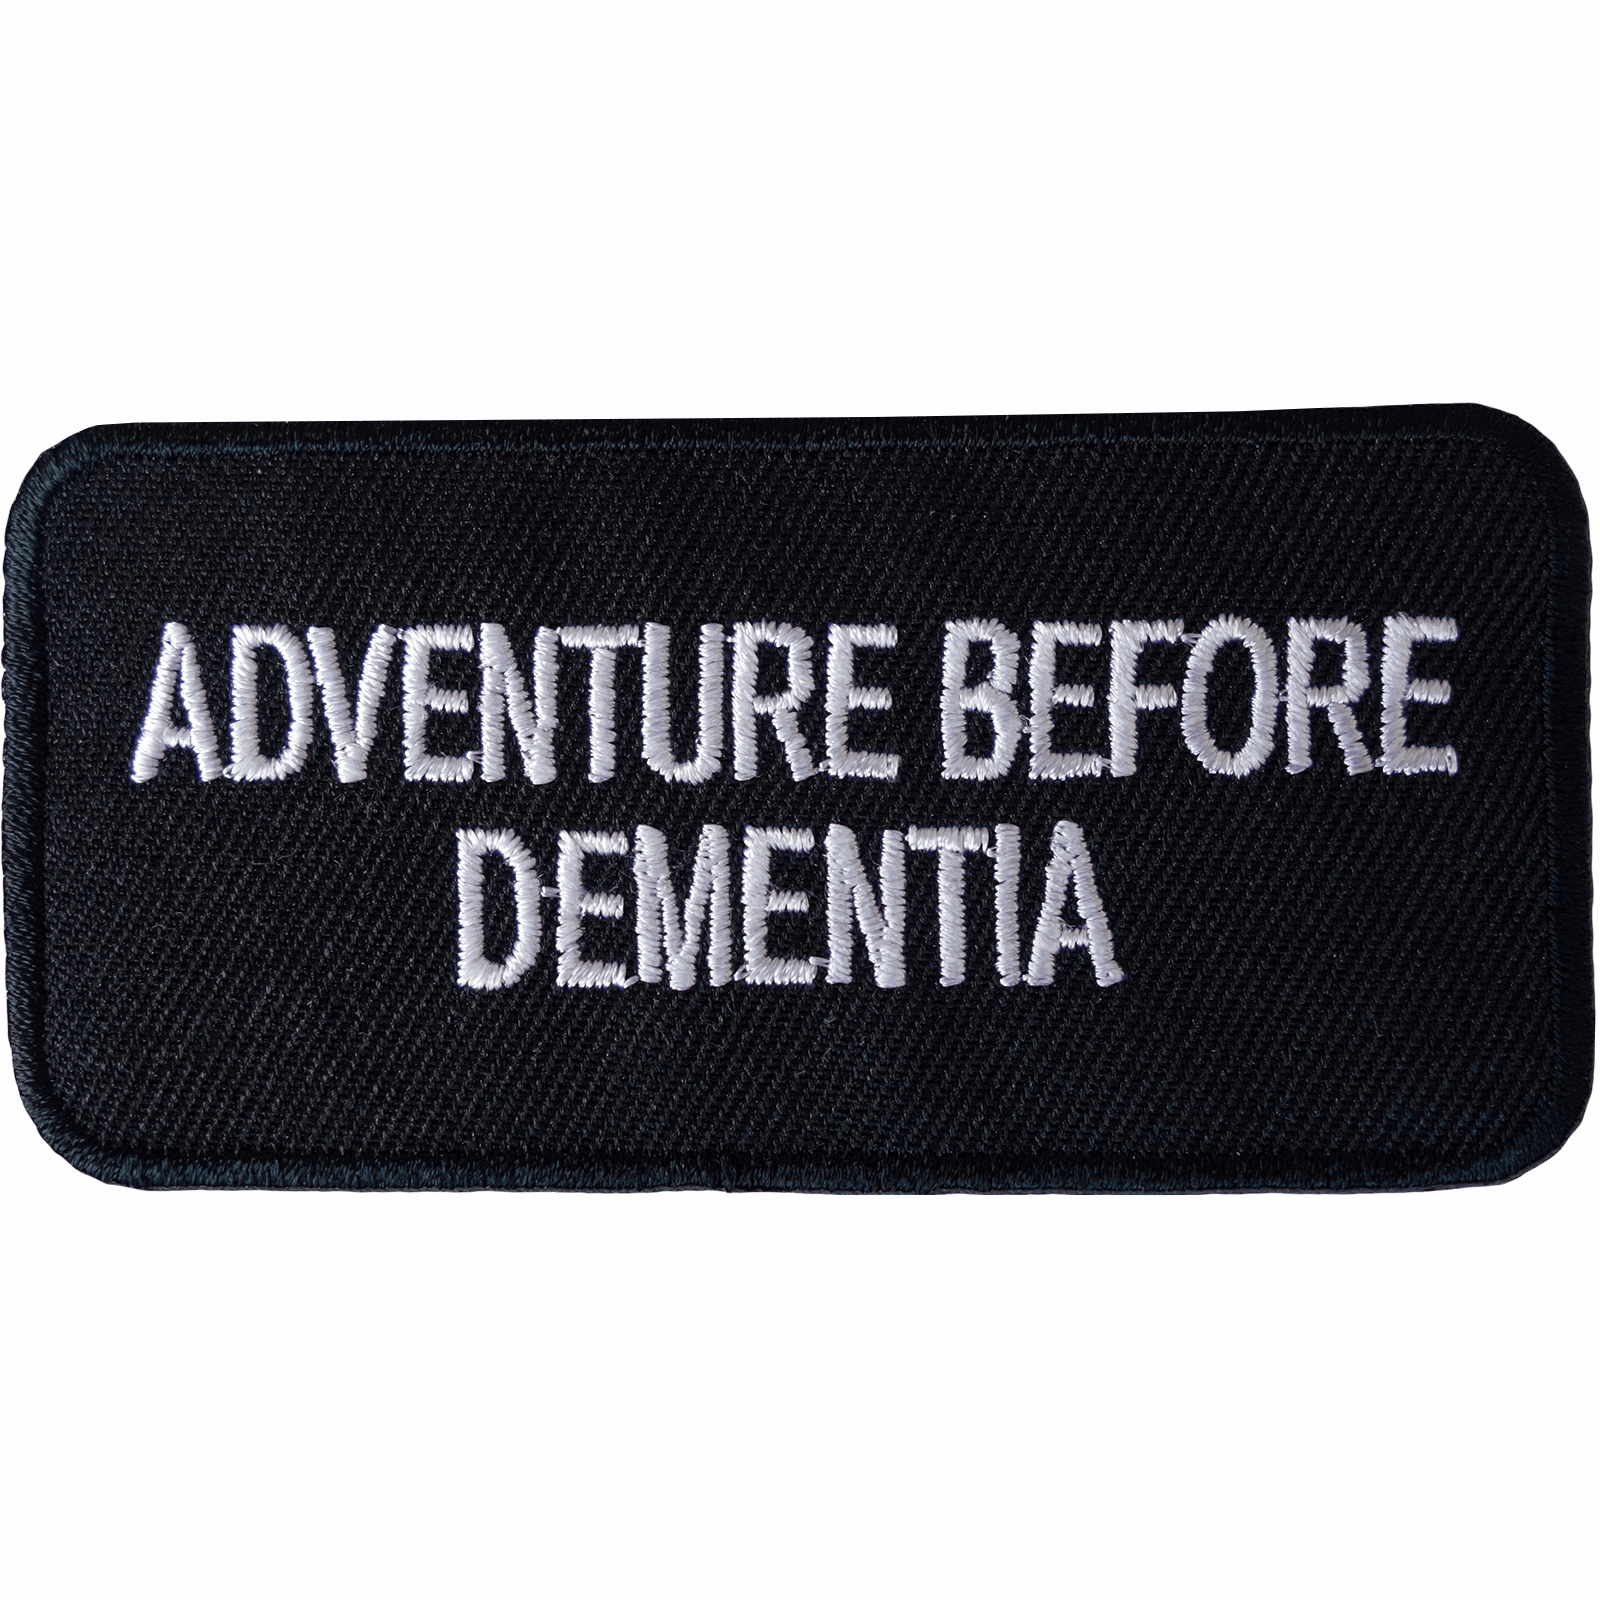 ADVENTURE BEFORE DEMENTIA Patch Iron Sew On Clothes Jacket Bag Embroidered Badge